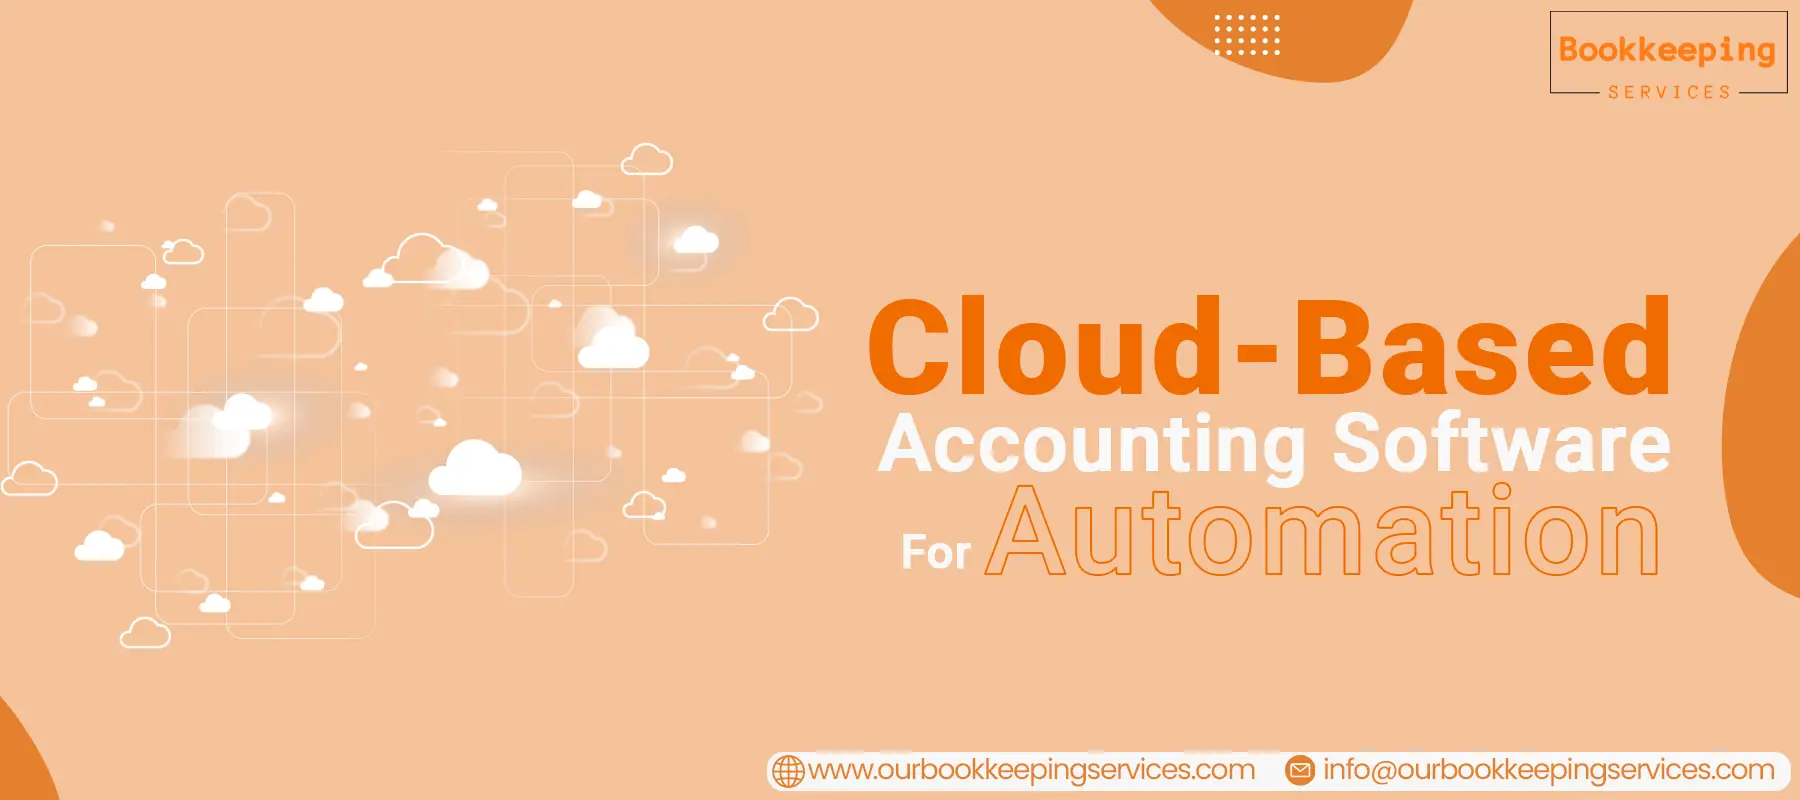 Use cloud-based accounting software for automation